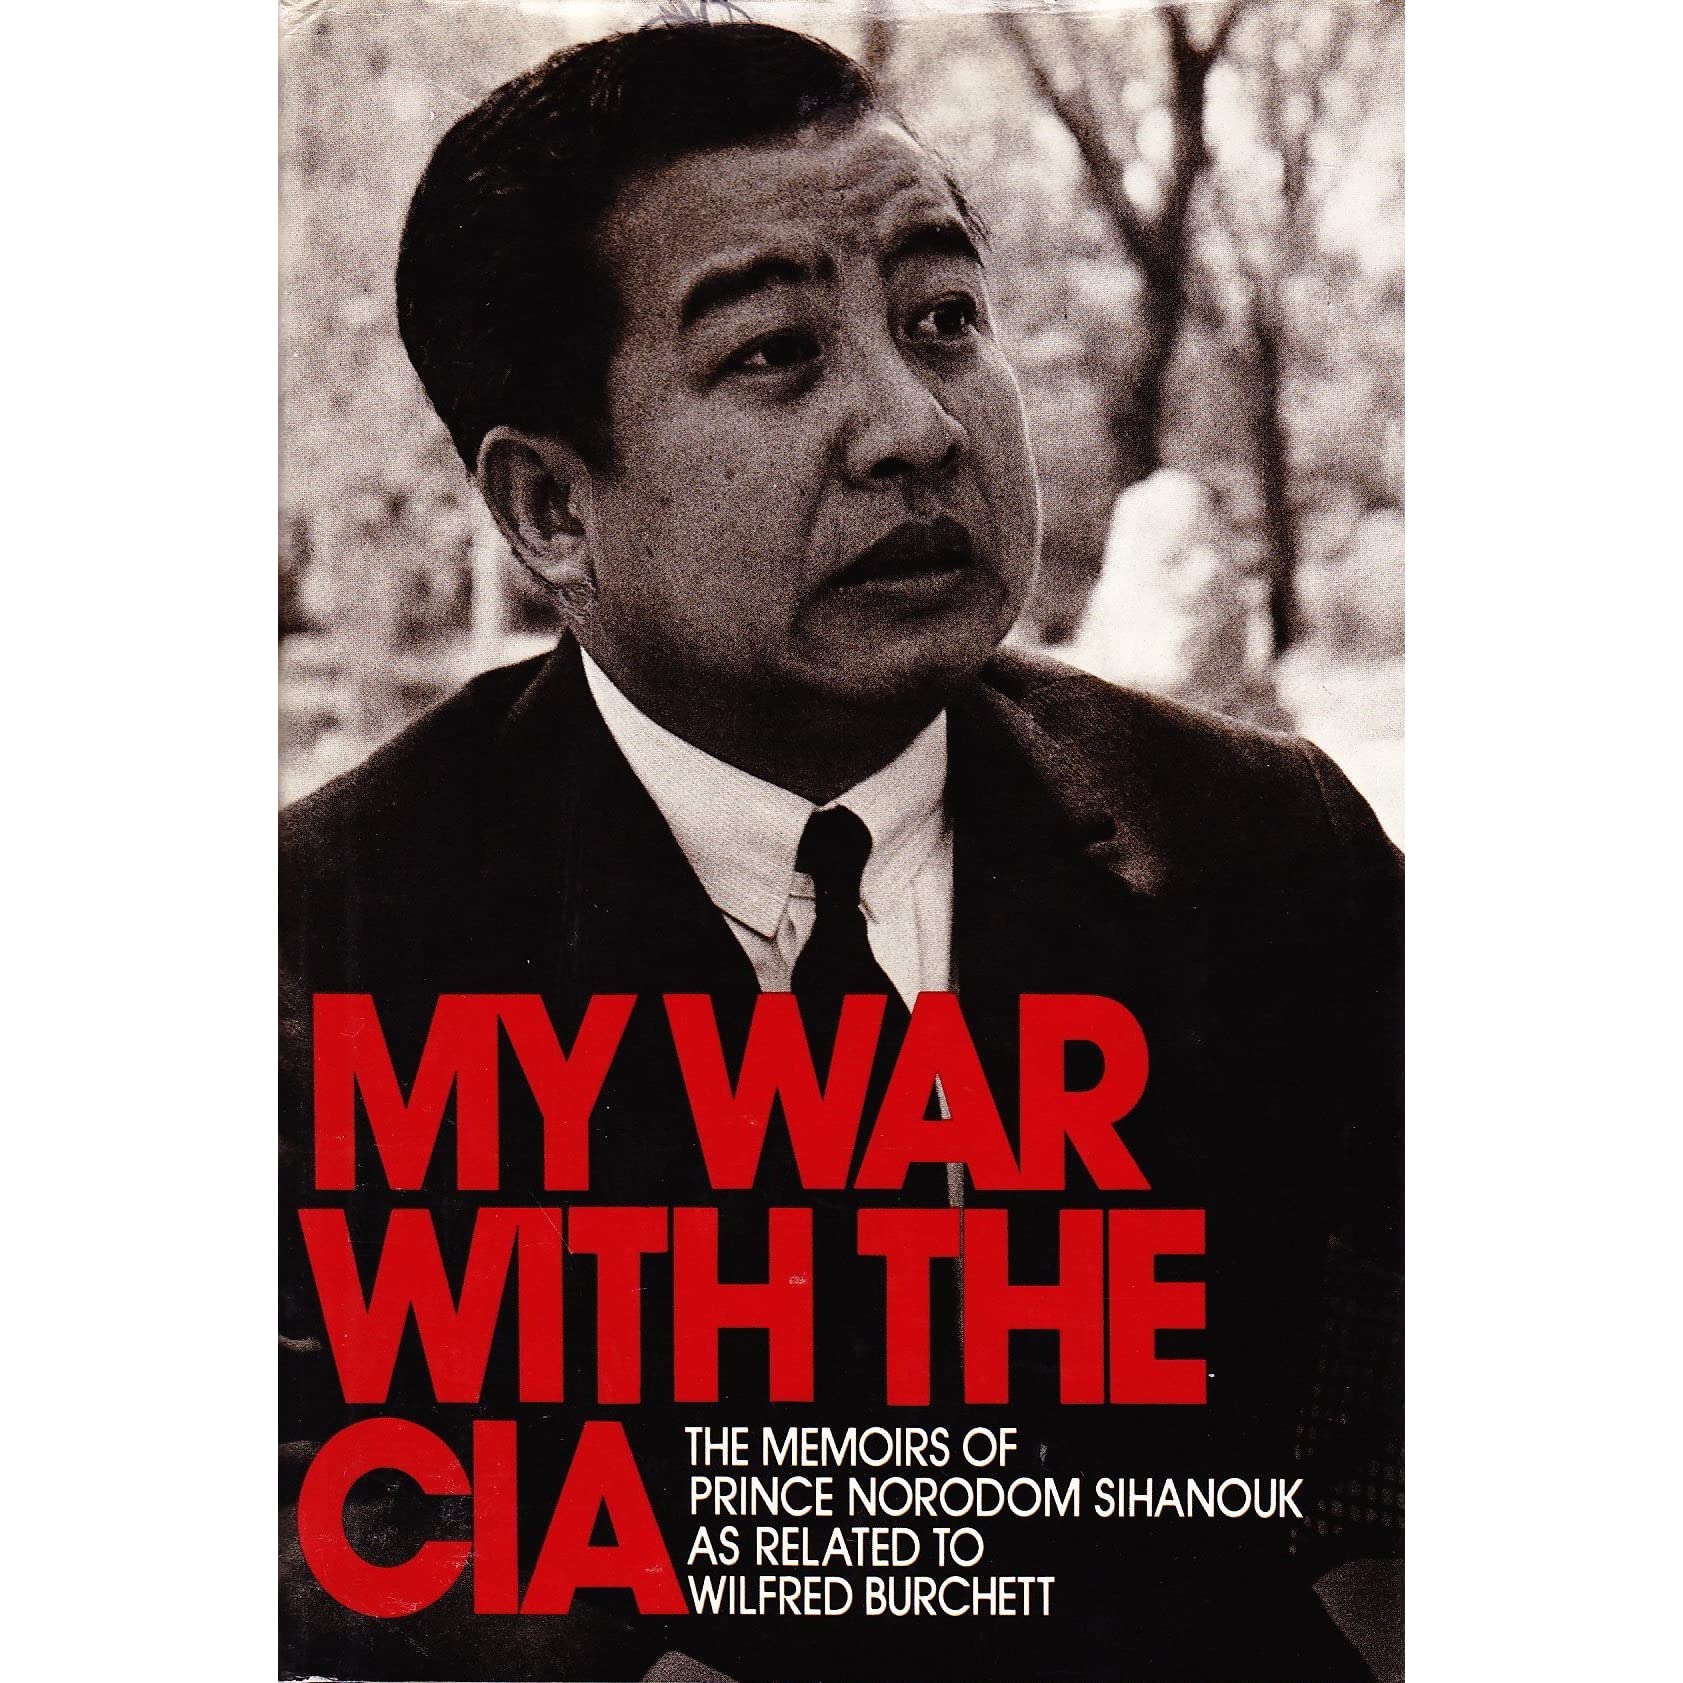 Image of Portions Of The Book My War With The Cia By Norodom Sihanouk And Wilfred Burchett